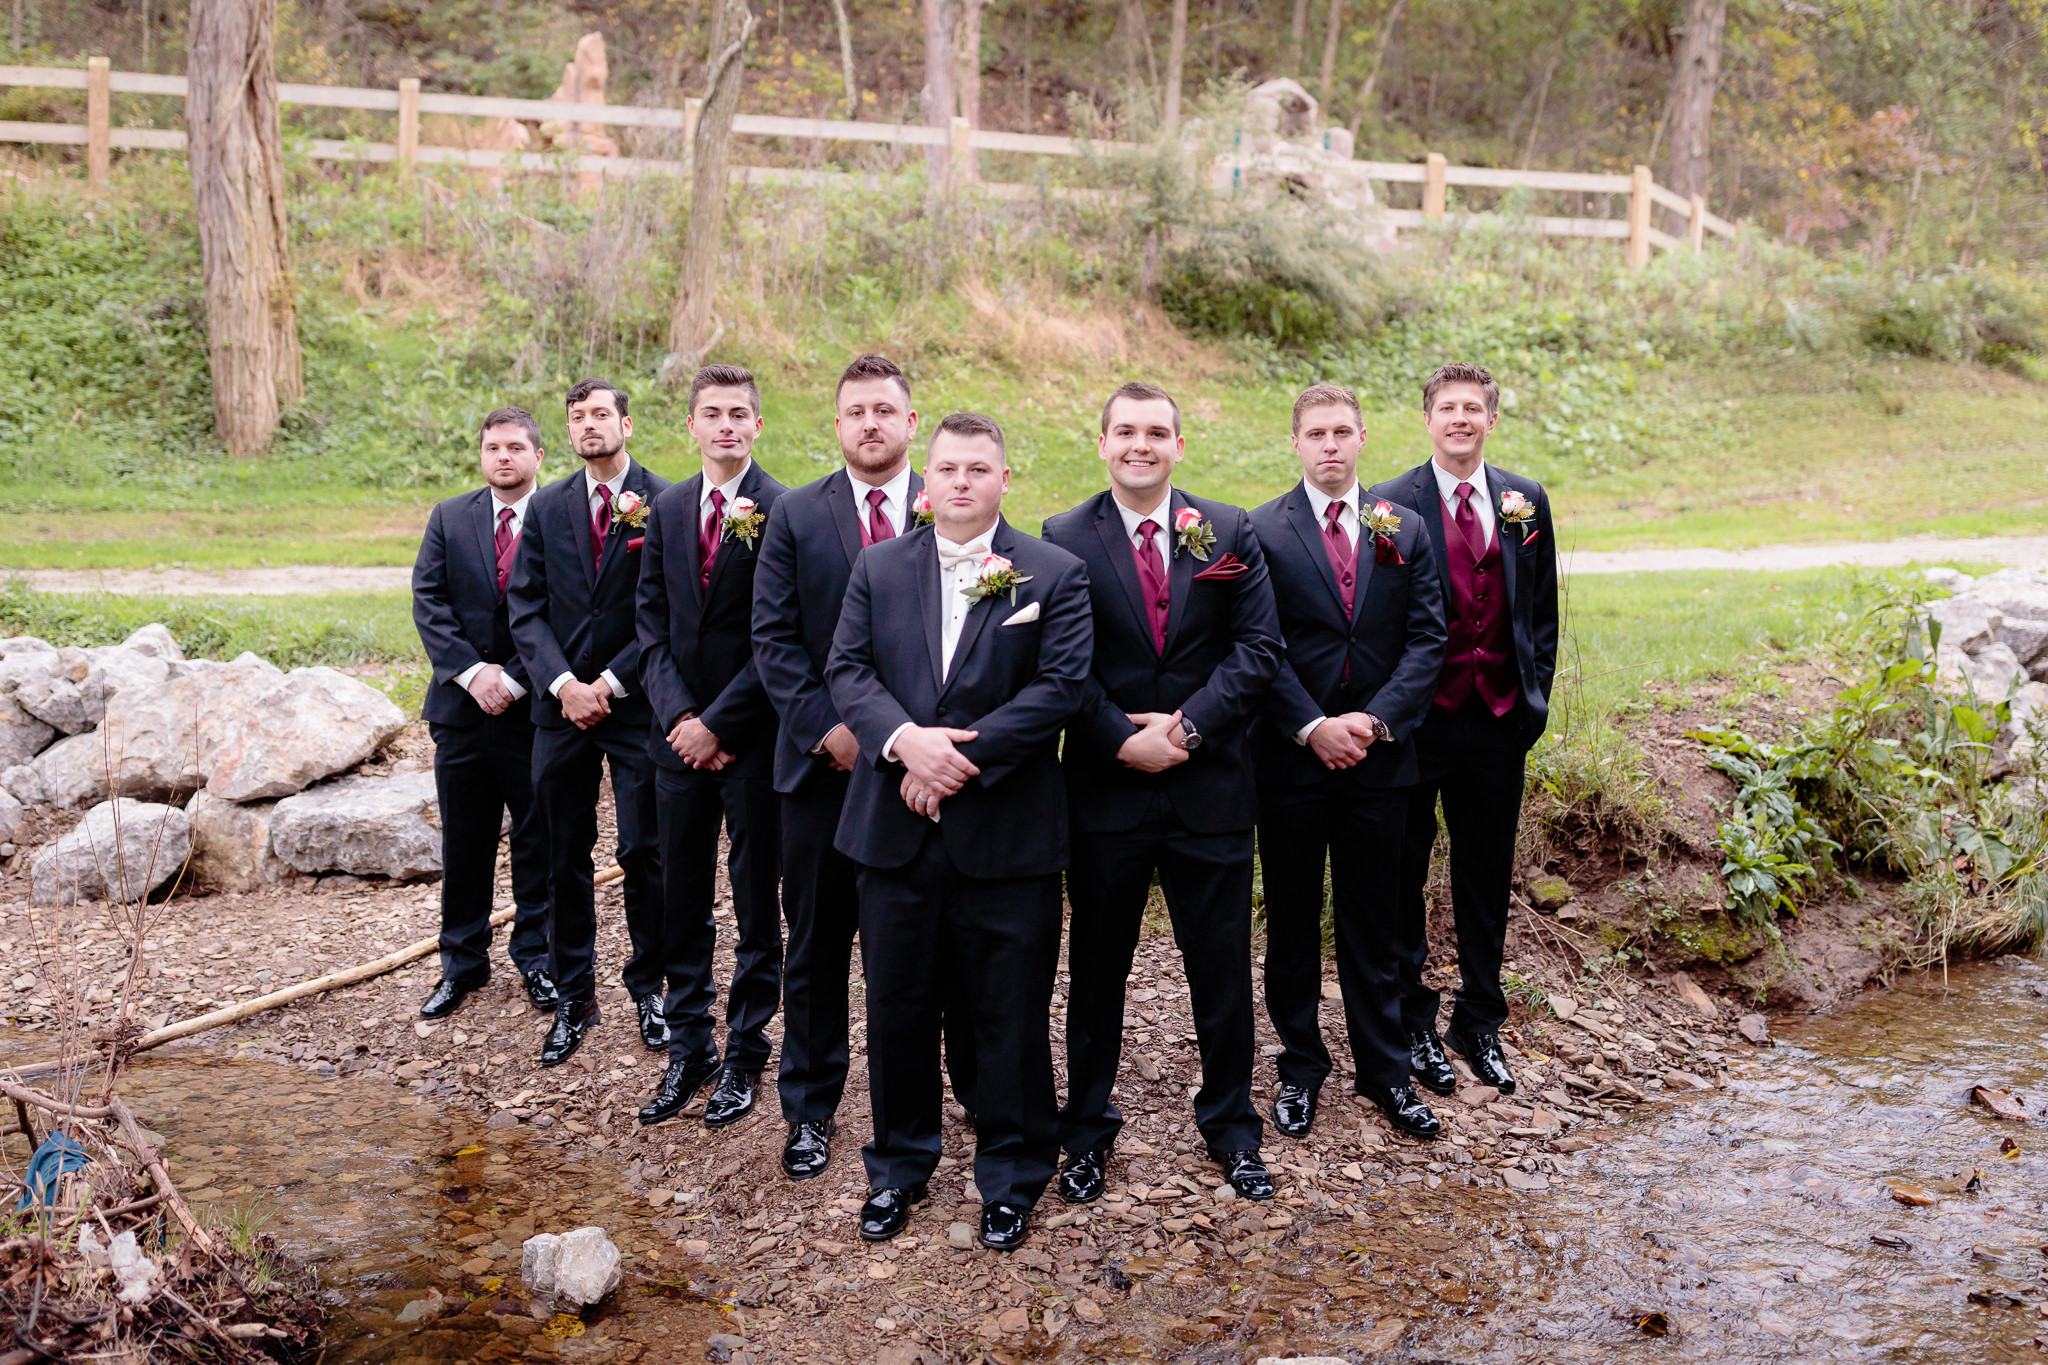 Groom with his groomsmen at Olson Park before a wedding at the Fez